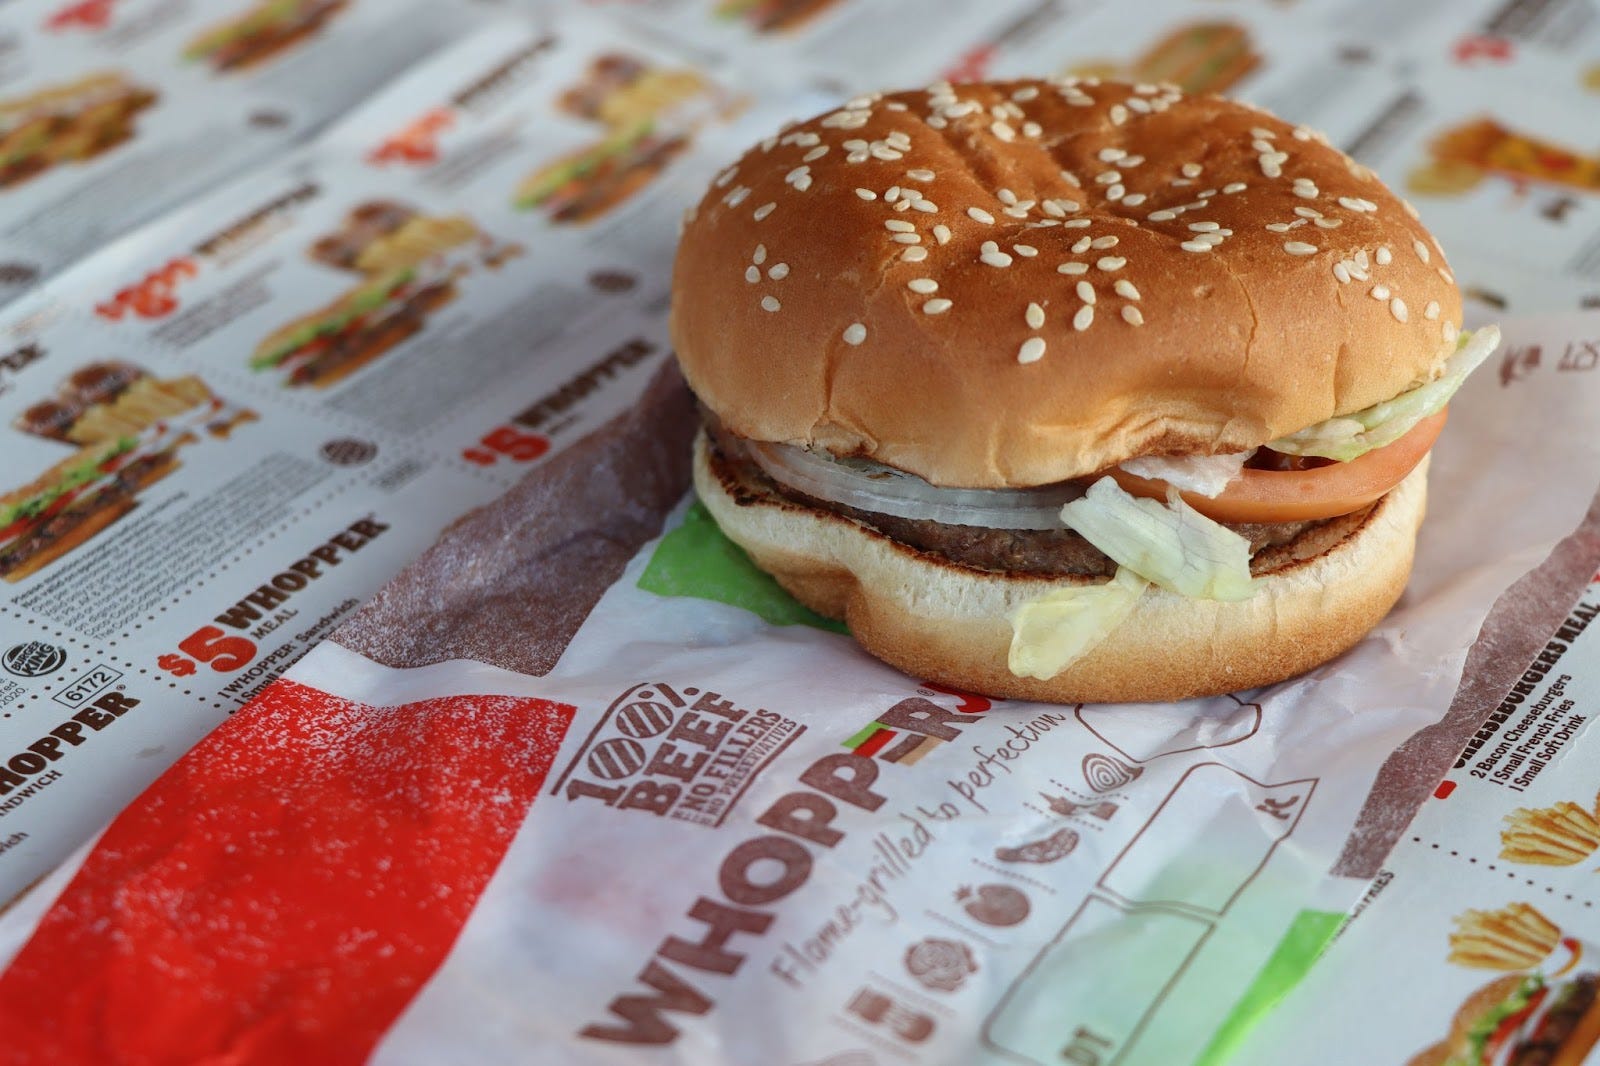 Serving Up Truth with a Side of Whopper: Should Burger King be